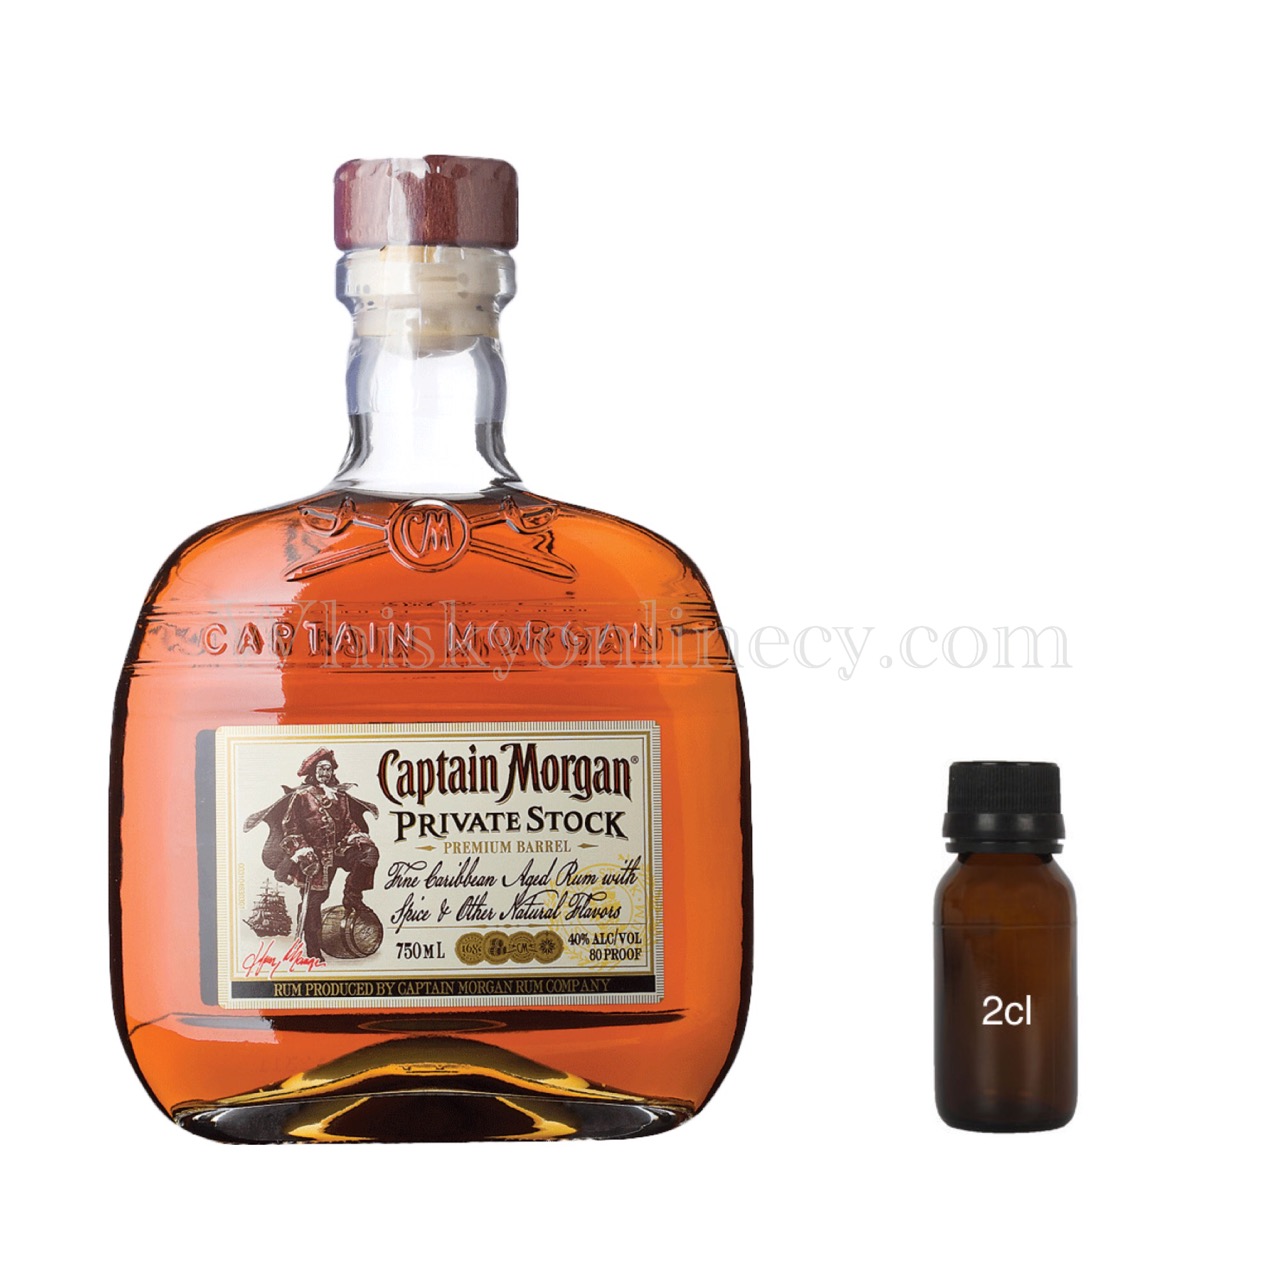 Whisky Online Cyprus - Captain Morgan Private Stock Sample (2cl, 40%)